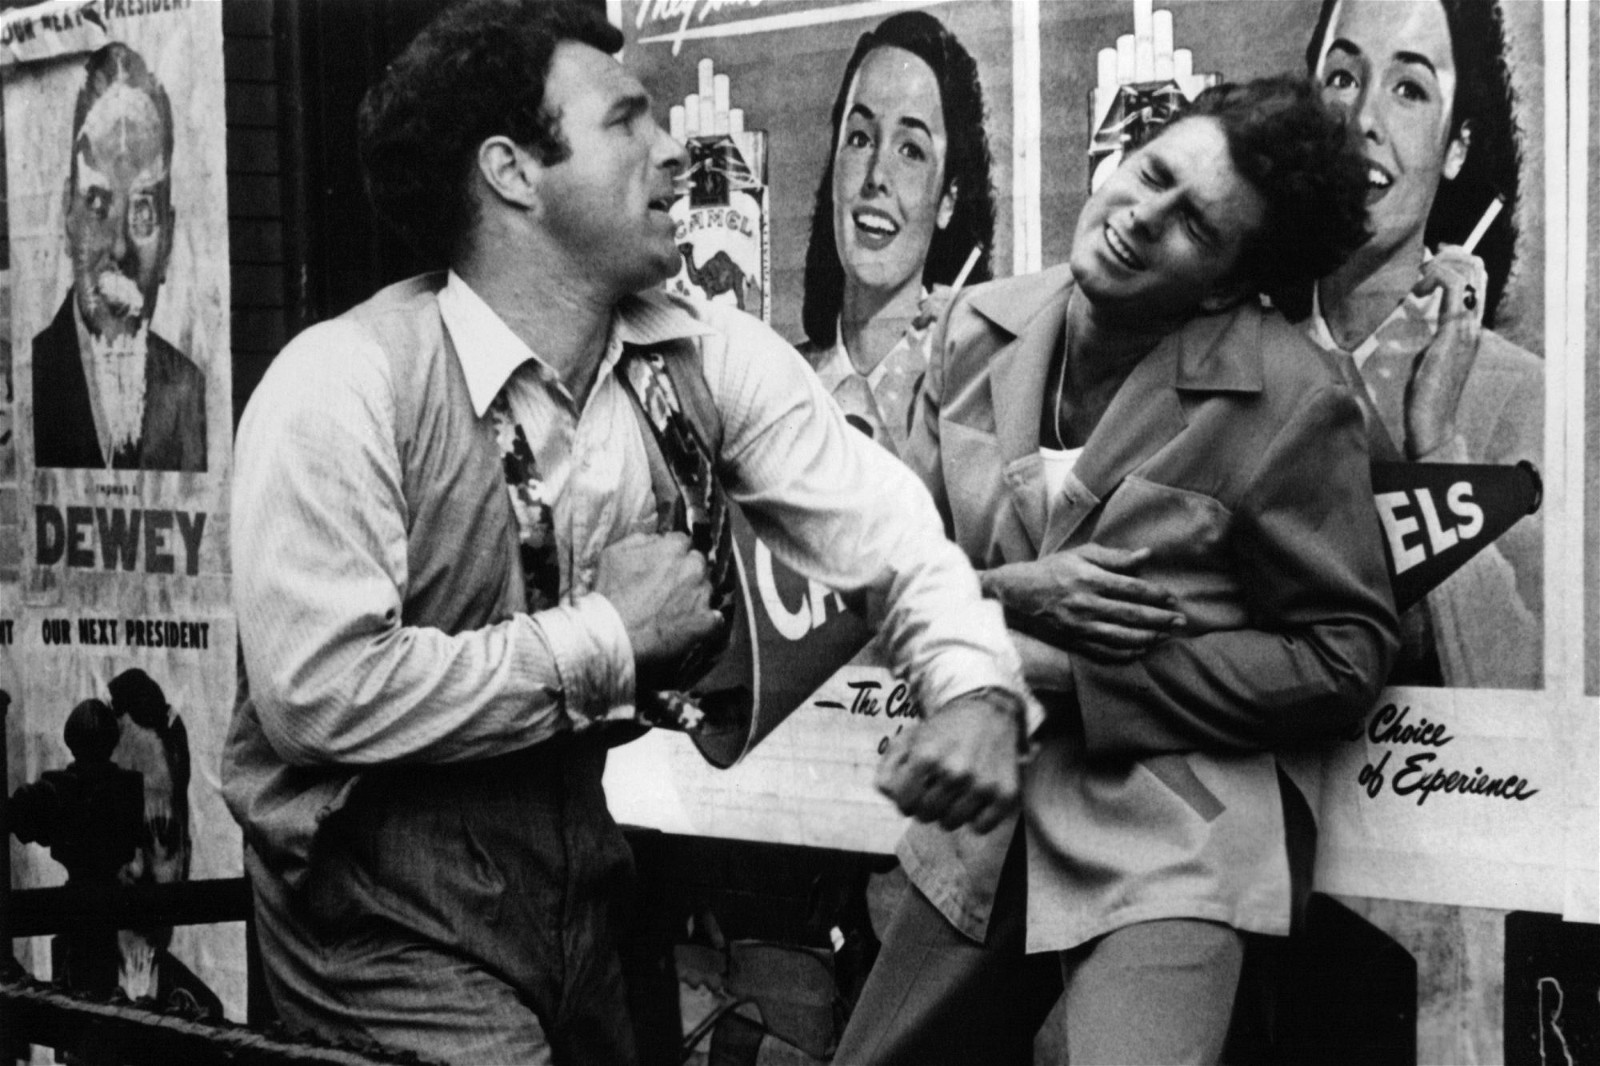 James Caan beat up Gianni Russo